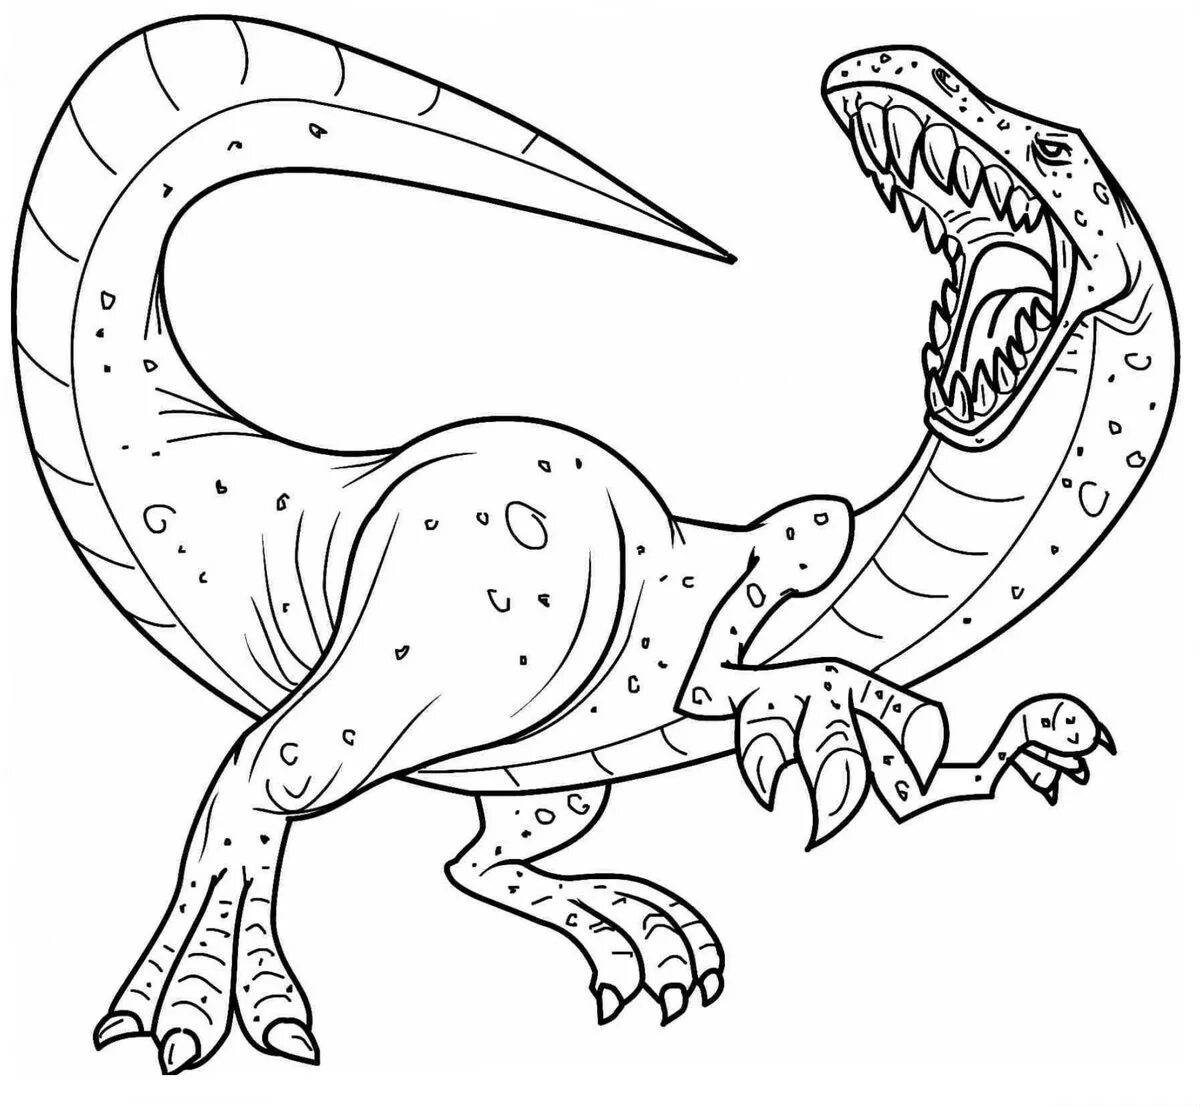 Wonderful dinosaur coloring pages